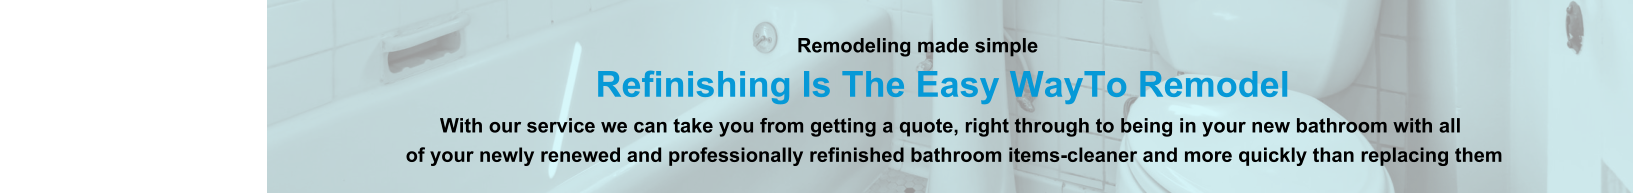 Remodeling made simple                              Refinishing Is The Easy WayTo Remodel                                                                                                                With our service we can take you from getting a quote, right through to being in your new bathroom with all                                                                          of your newly renewed and professionally refinished bathroom items-cleaner and more quickly than replacing them